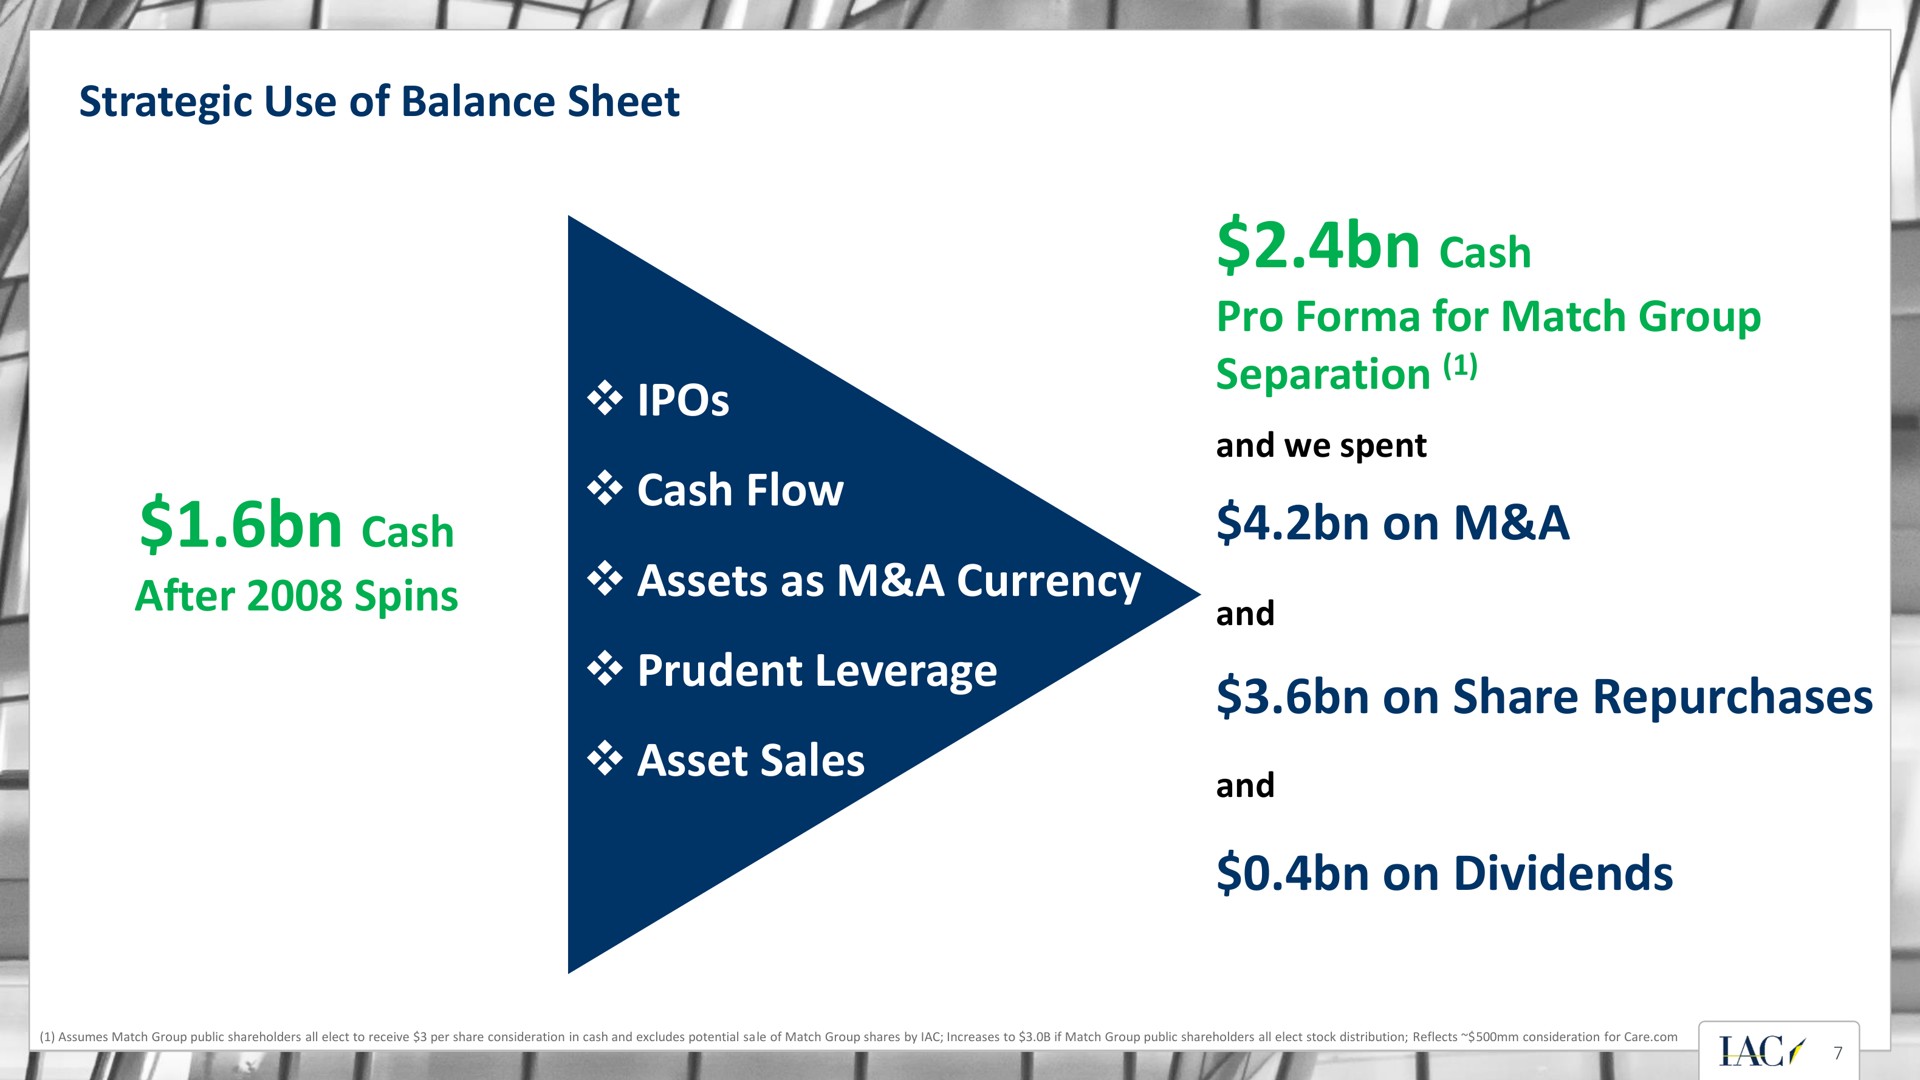 strategic use of balance sheet cash after spins cash flow cash pro for match group separation on a assets as a currency prudent leverage asset sales on share repurchases on dividends ait i i och and we spent and ans my i | IAC